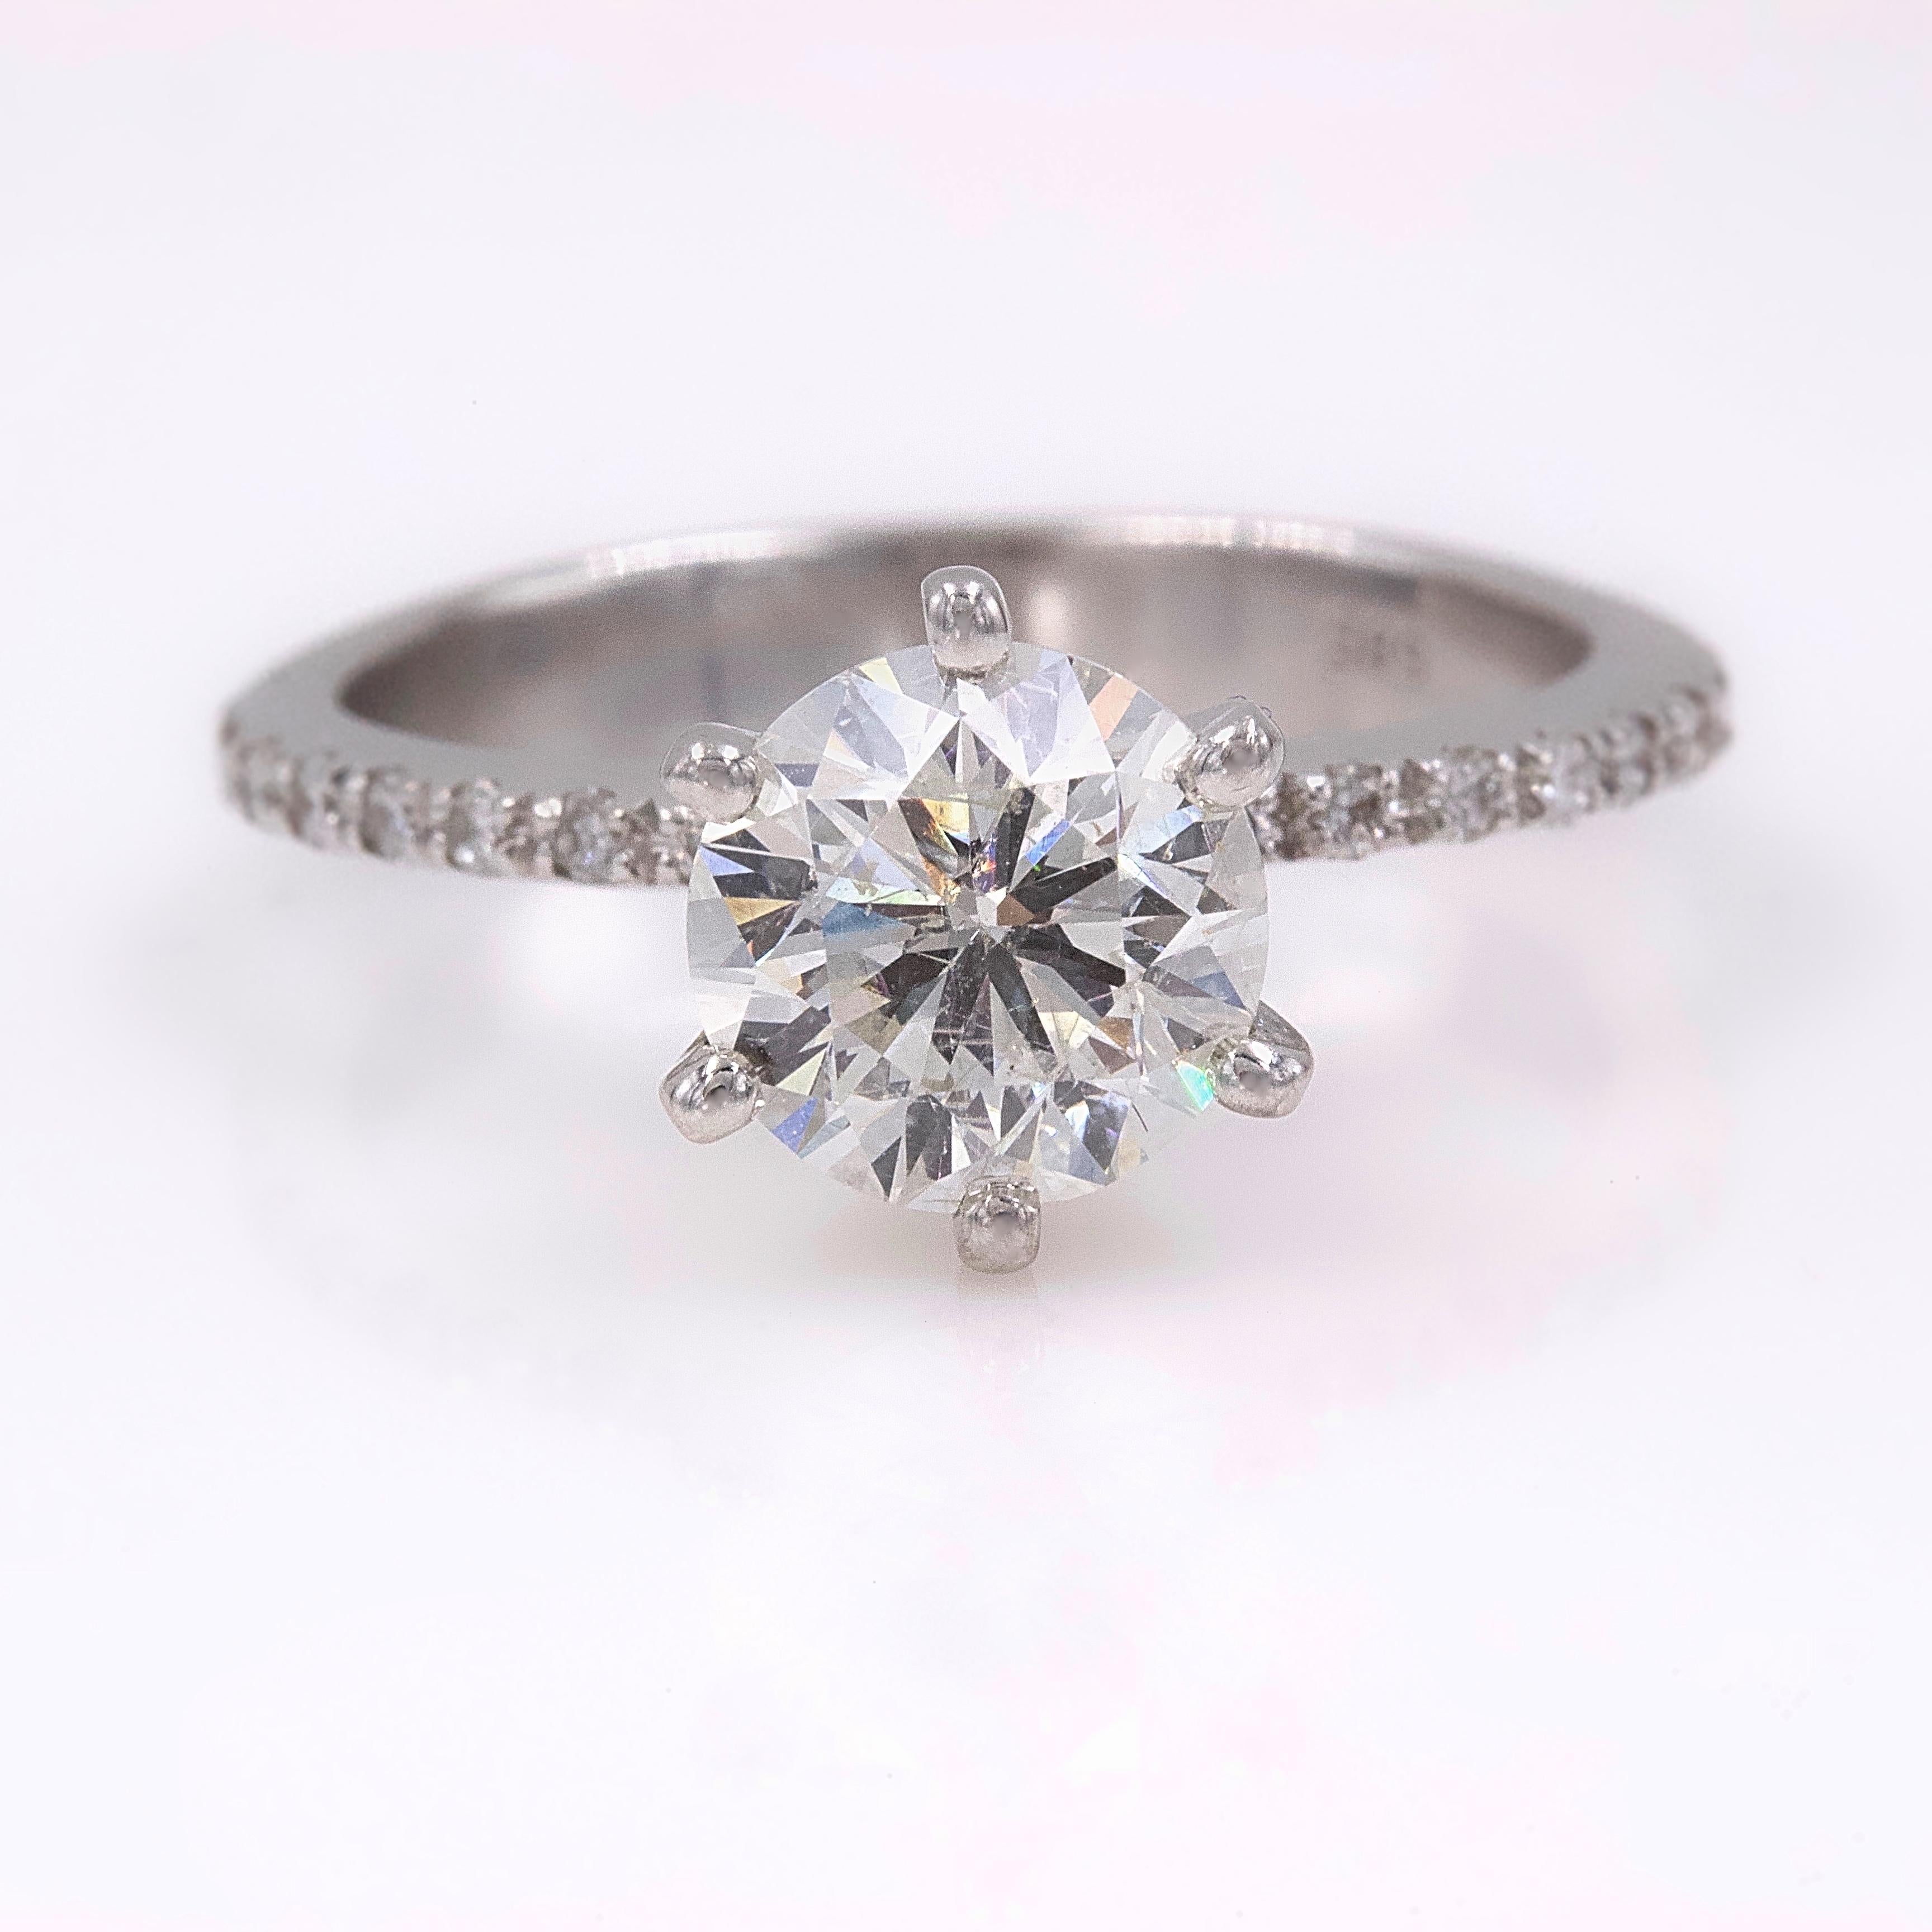 DIAMOND ENGAGEMENT RING

Style:  Solitaire with Diamond Band
Serial Number:  BB10010
Certification:  IGL 6798464
Metal:  14K White Gold
Size:  6.75 - sizable
Total Carat Weight:  1.74 tcw
Diamond Shape:  Round Brilliant Cut 1.64 ct Ideal Cut
Diamond